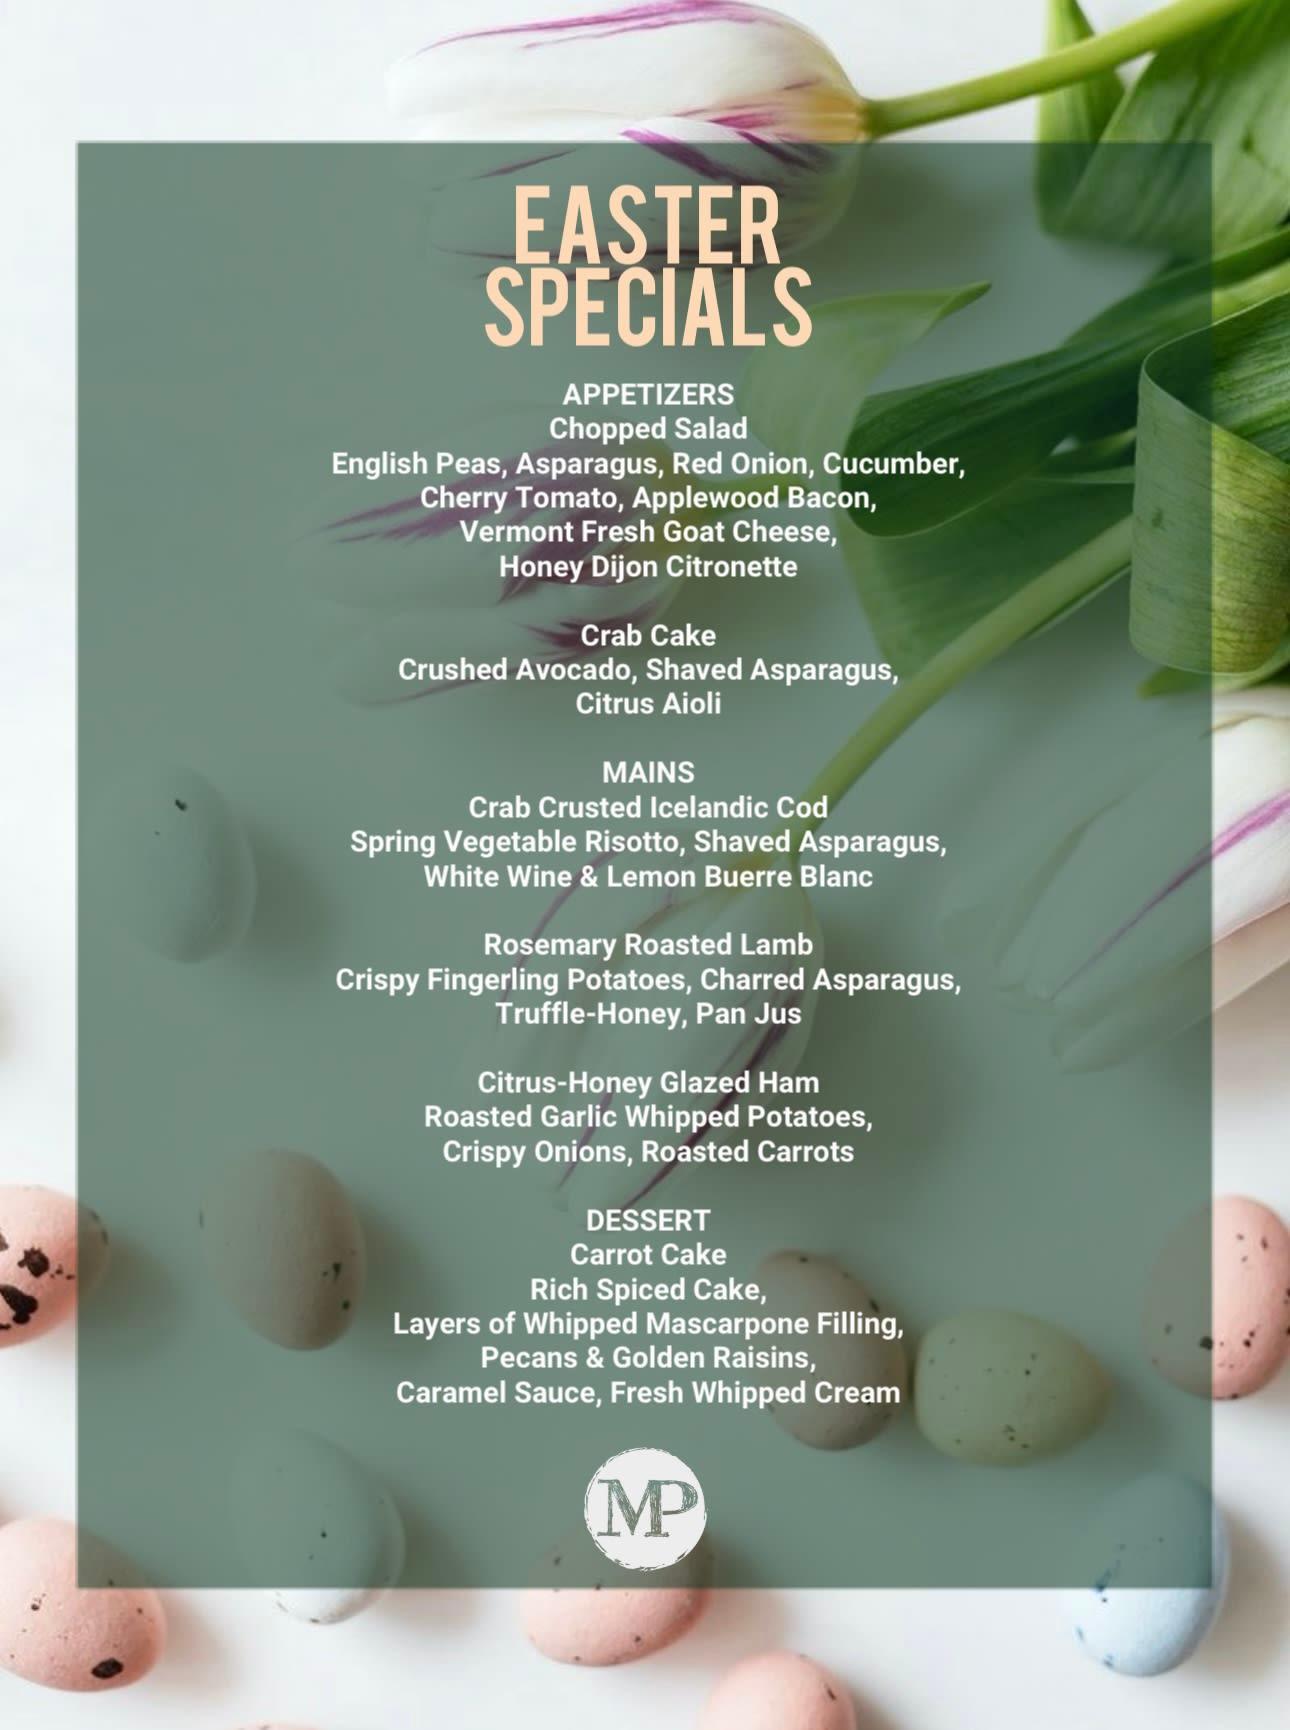 Hop On Over For Egg-citing Easter Specials! 🥂 🐰🌷

Just A Few Weeks Away, Be Sure To Make Your Reservations!